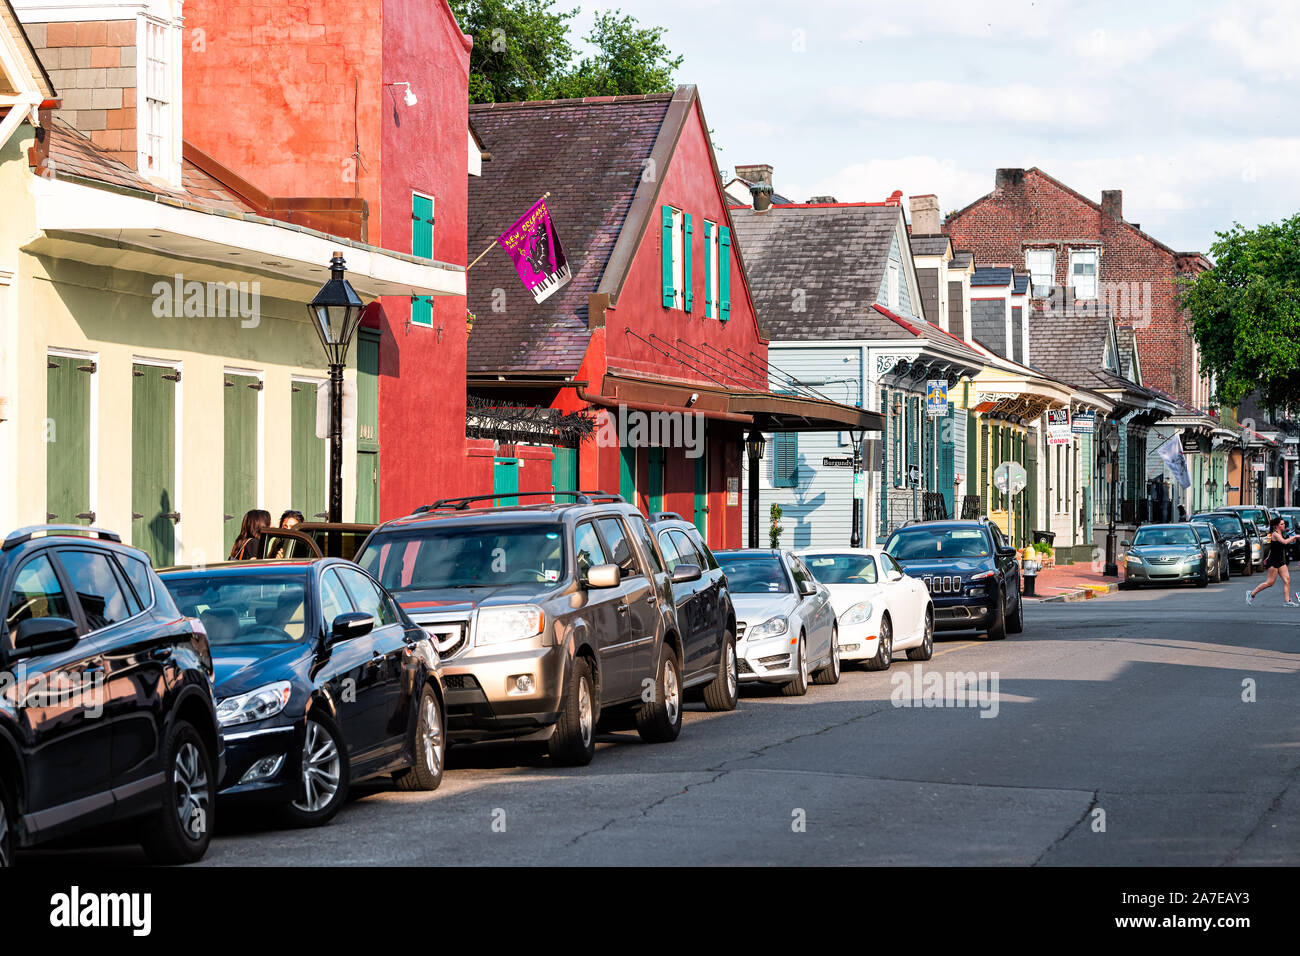 New Orleans, USA - April 23, 2018: Old town Orleans street in Louisiana famous town with row of red colorful buildings homes and parked cars Stock Photo